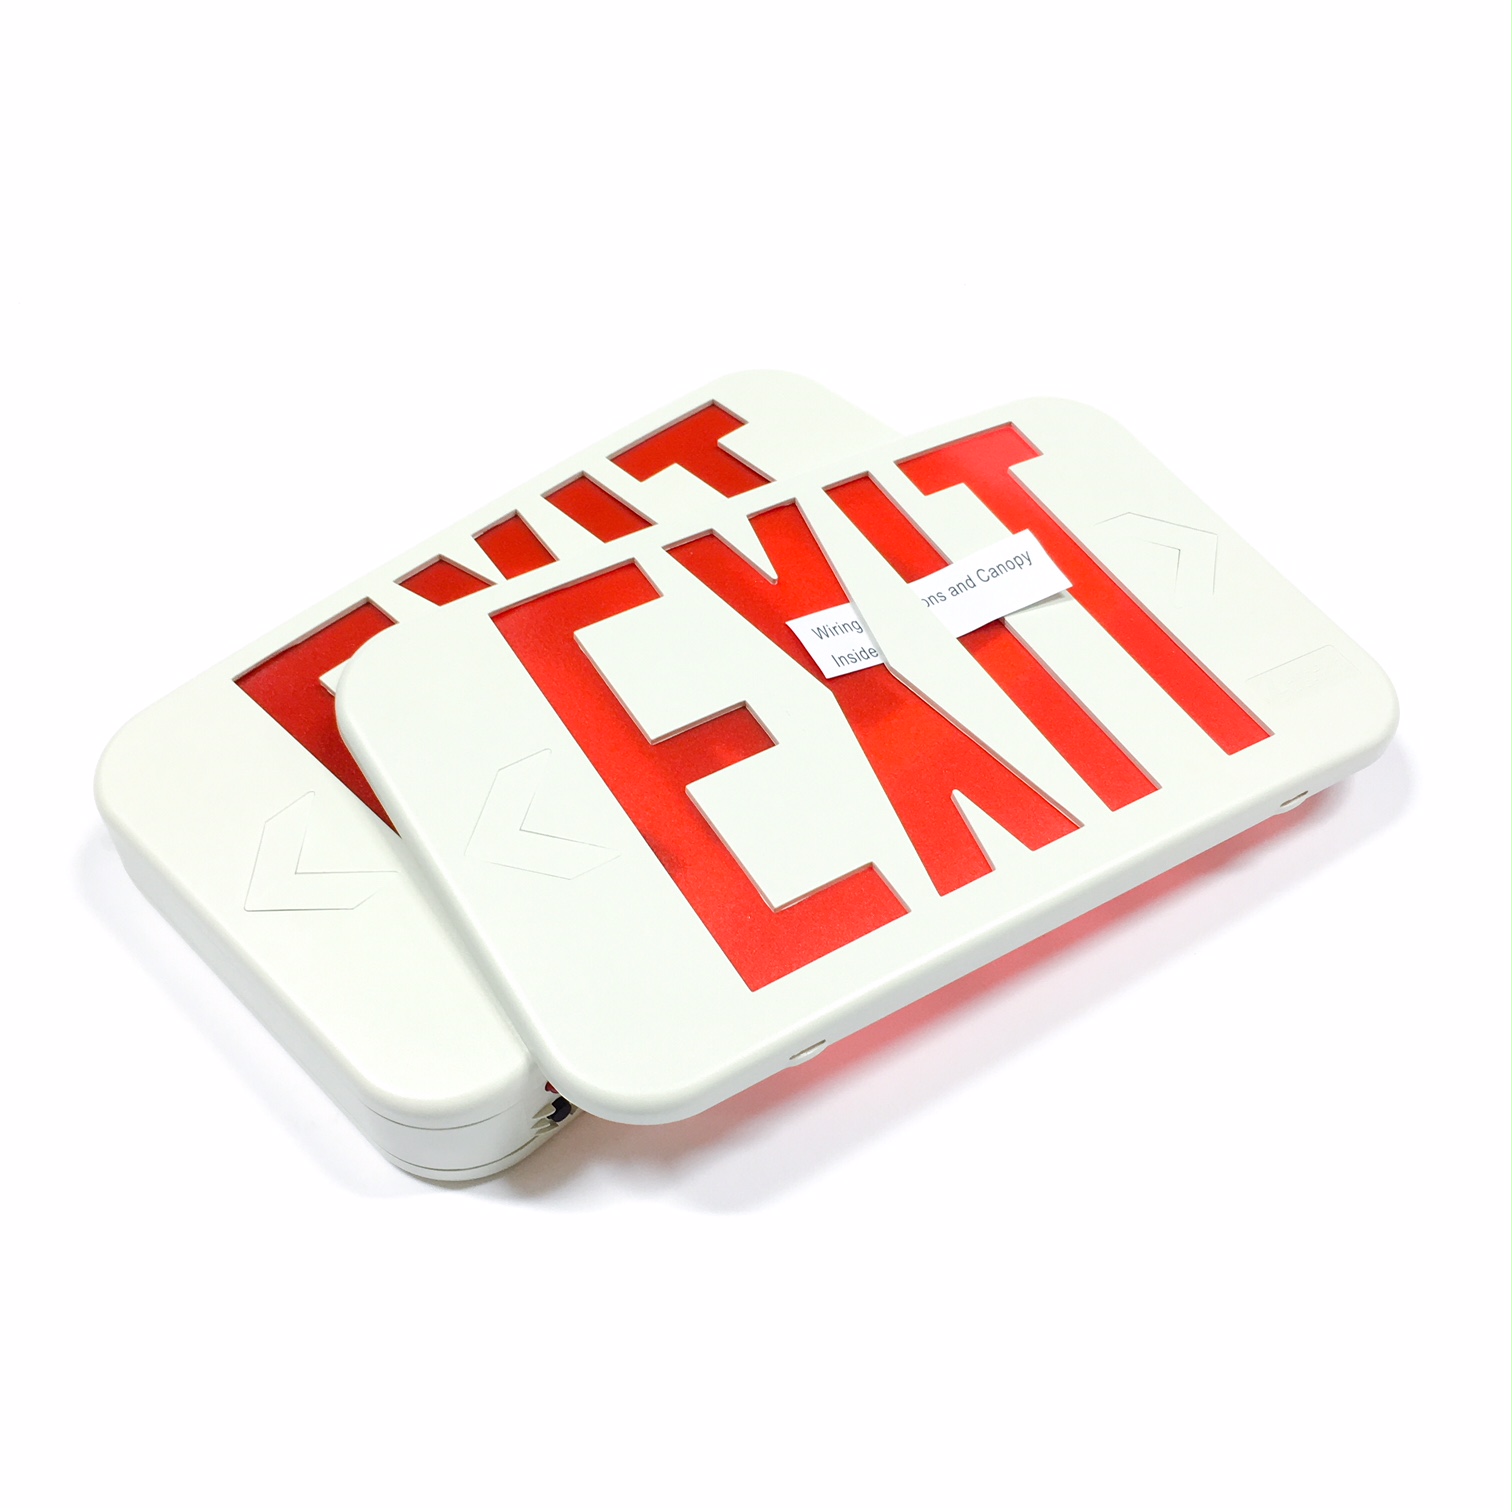 Lithonia Lighting EXR LED El M6 Exit Sign Red Emergency 210lc6 for sale online 